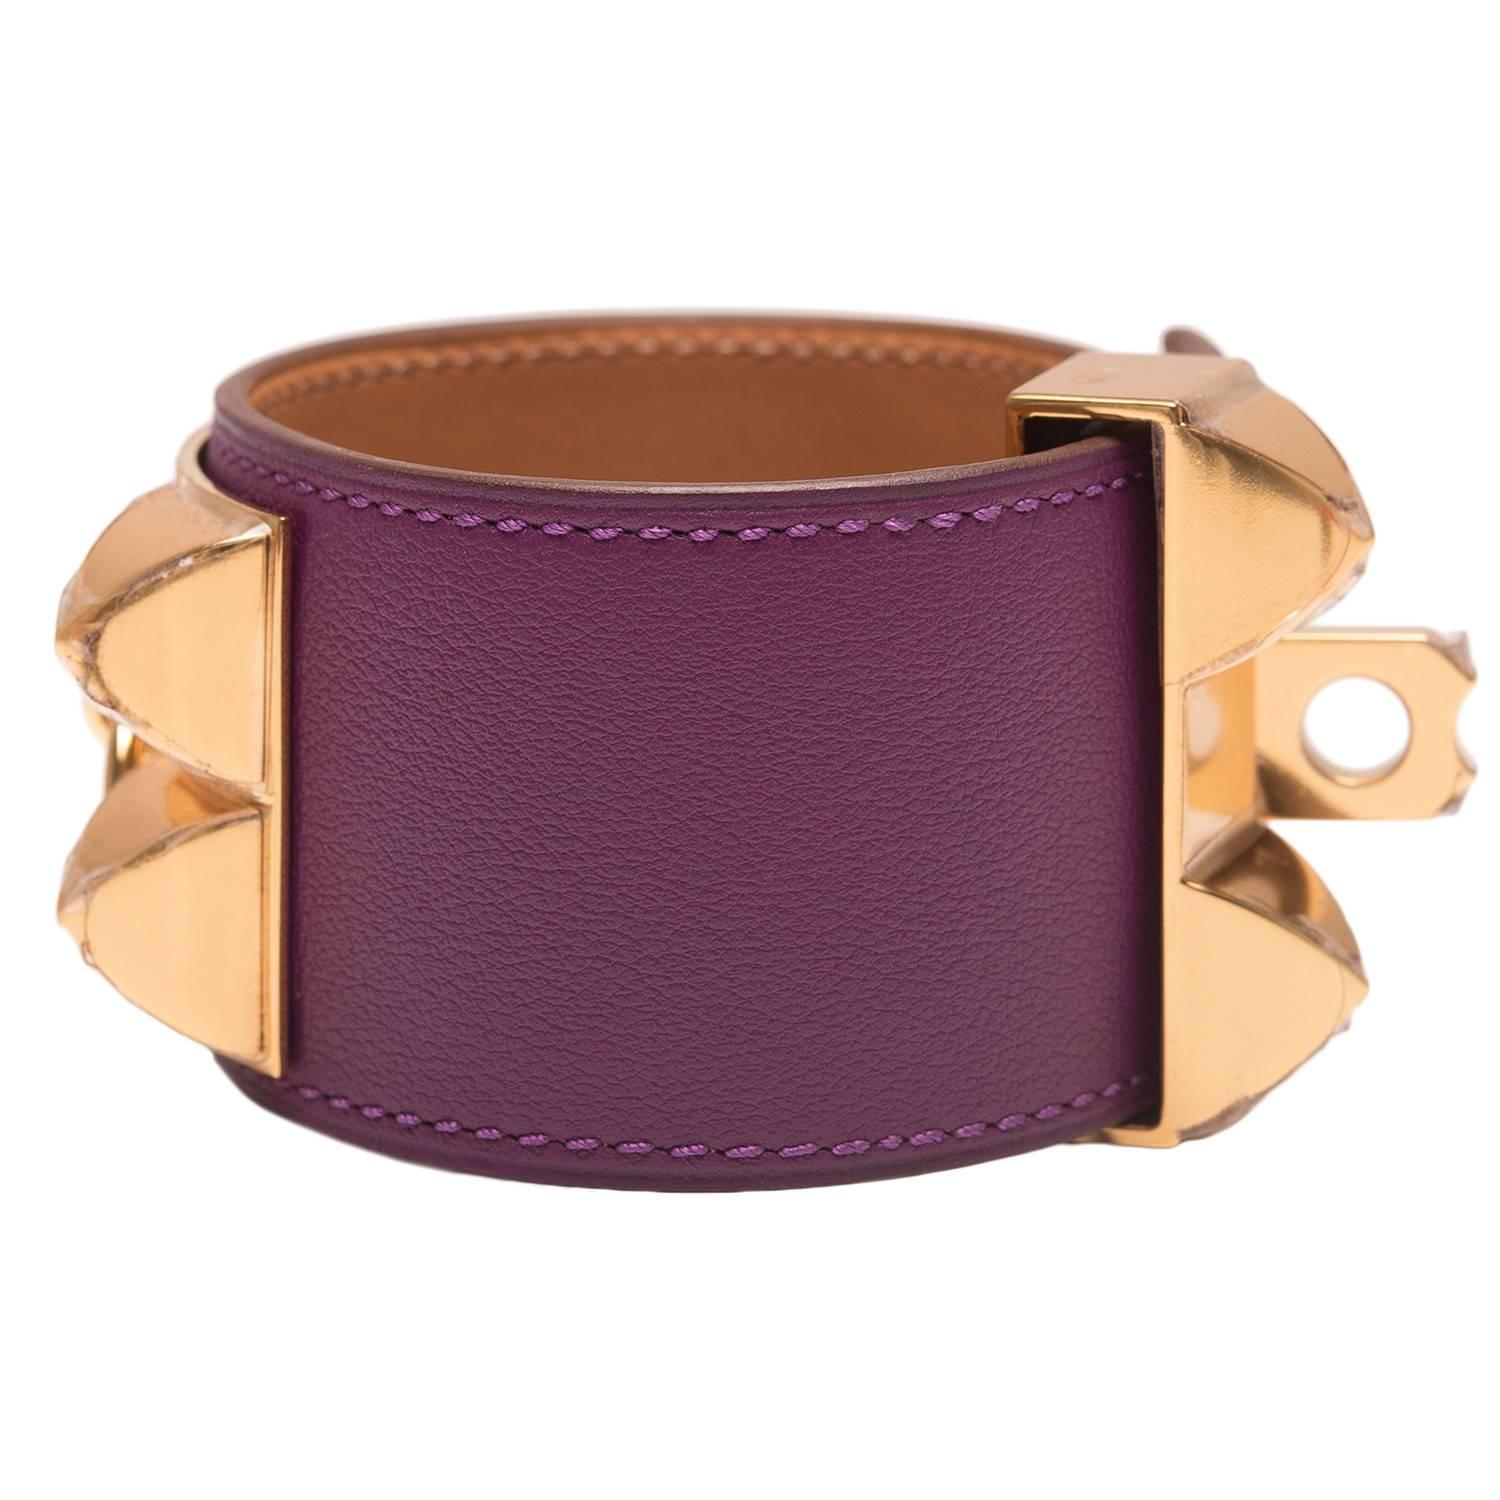 Hermes Collier de Chien (CDC) in Anemone swift leather with gold plated hardware in size small.

This style features gold pyramid studs, center ring and adjustable push lock closure.

Collection: R Square

Origin: France

Condition: